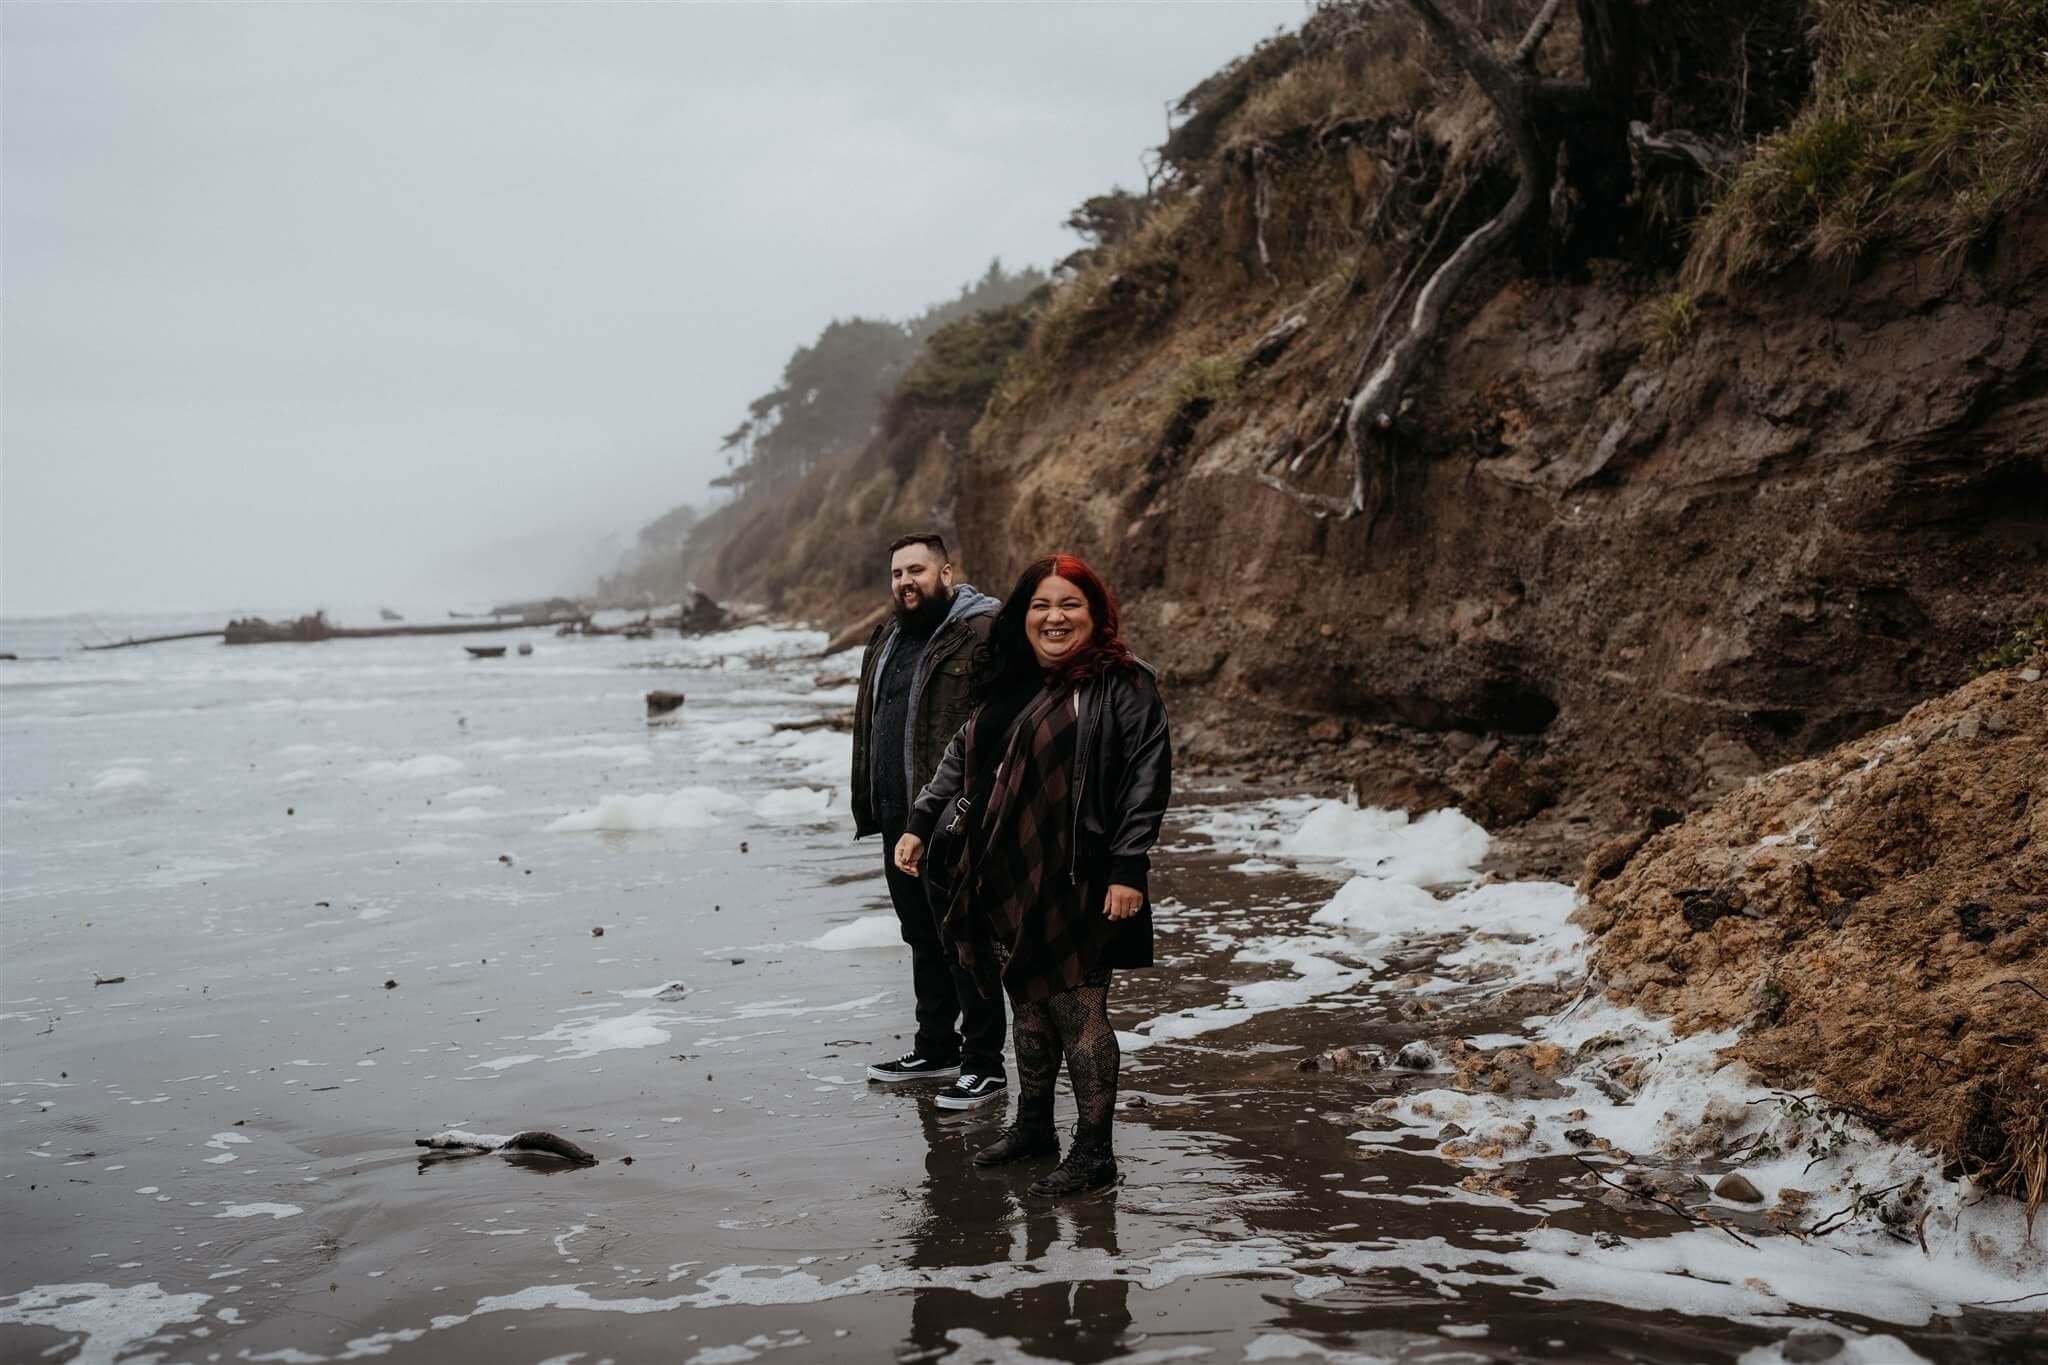 Couple photos on the beach for Halloween engagement session